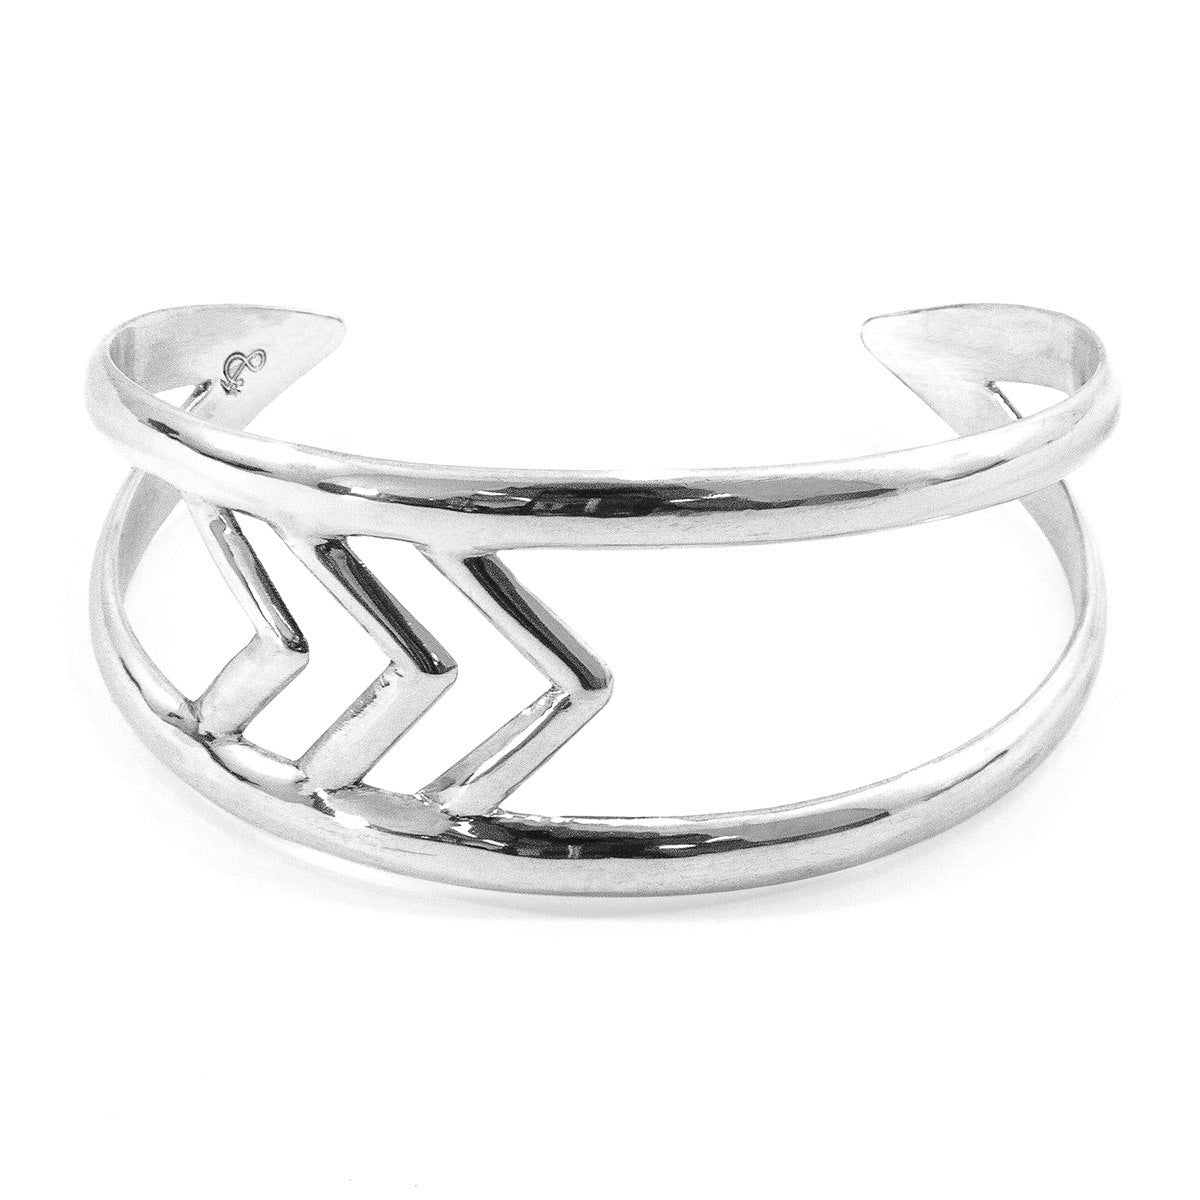 Montanita Maxi Surf Silver Bangle - Handcrafted in Great Britain with Chevron Arrows - Solid .925 Sterling Silver - One Size Fits Most - Jewelry & Watches - Bijou Her -  -  - 